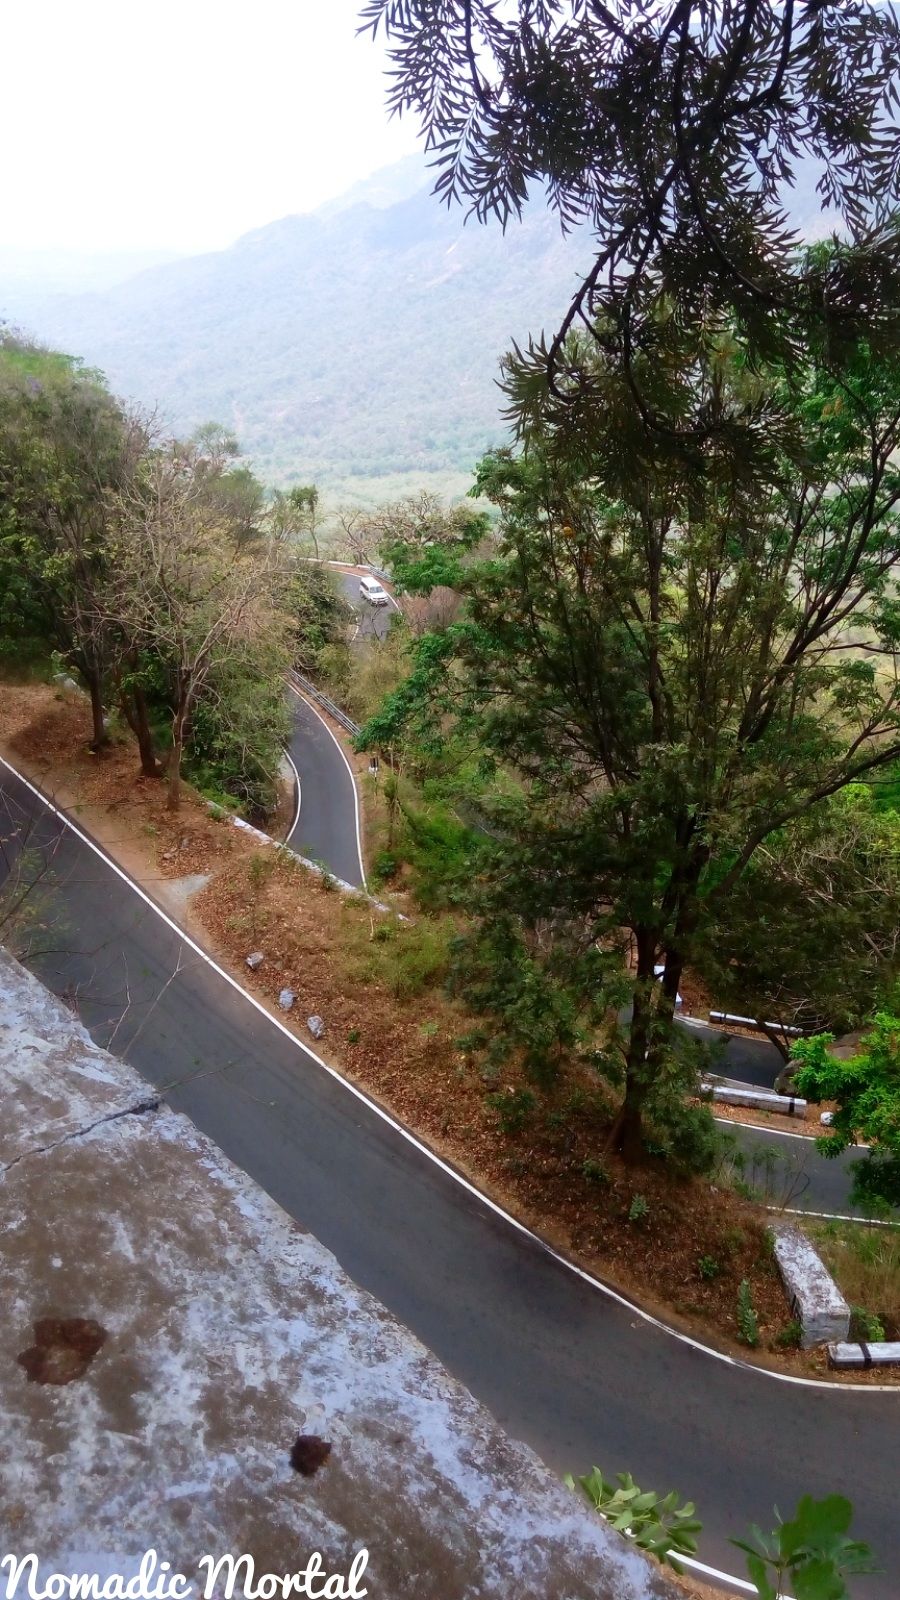 Photo of Kolli Hills Is The Scenic Road Trip You Must Take From Bangalore 5/8 by Shwetha